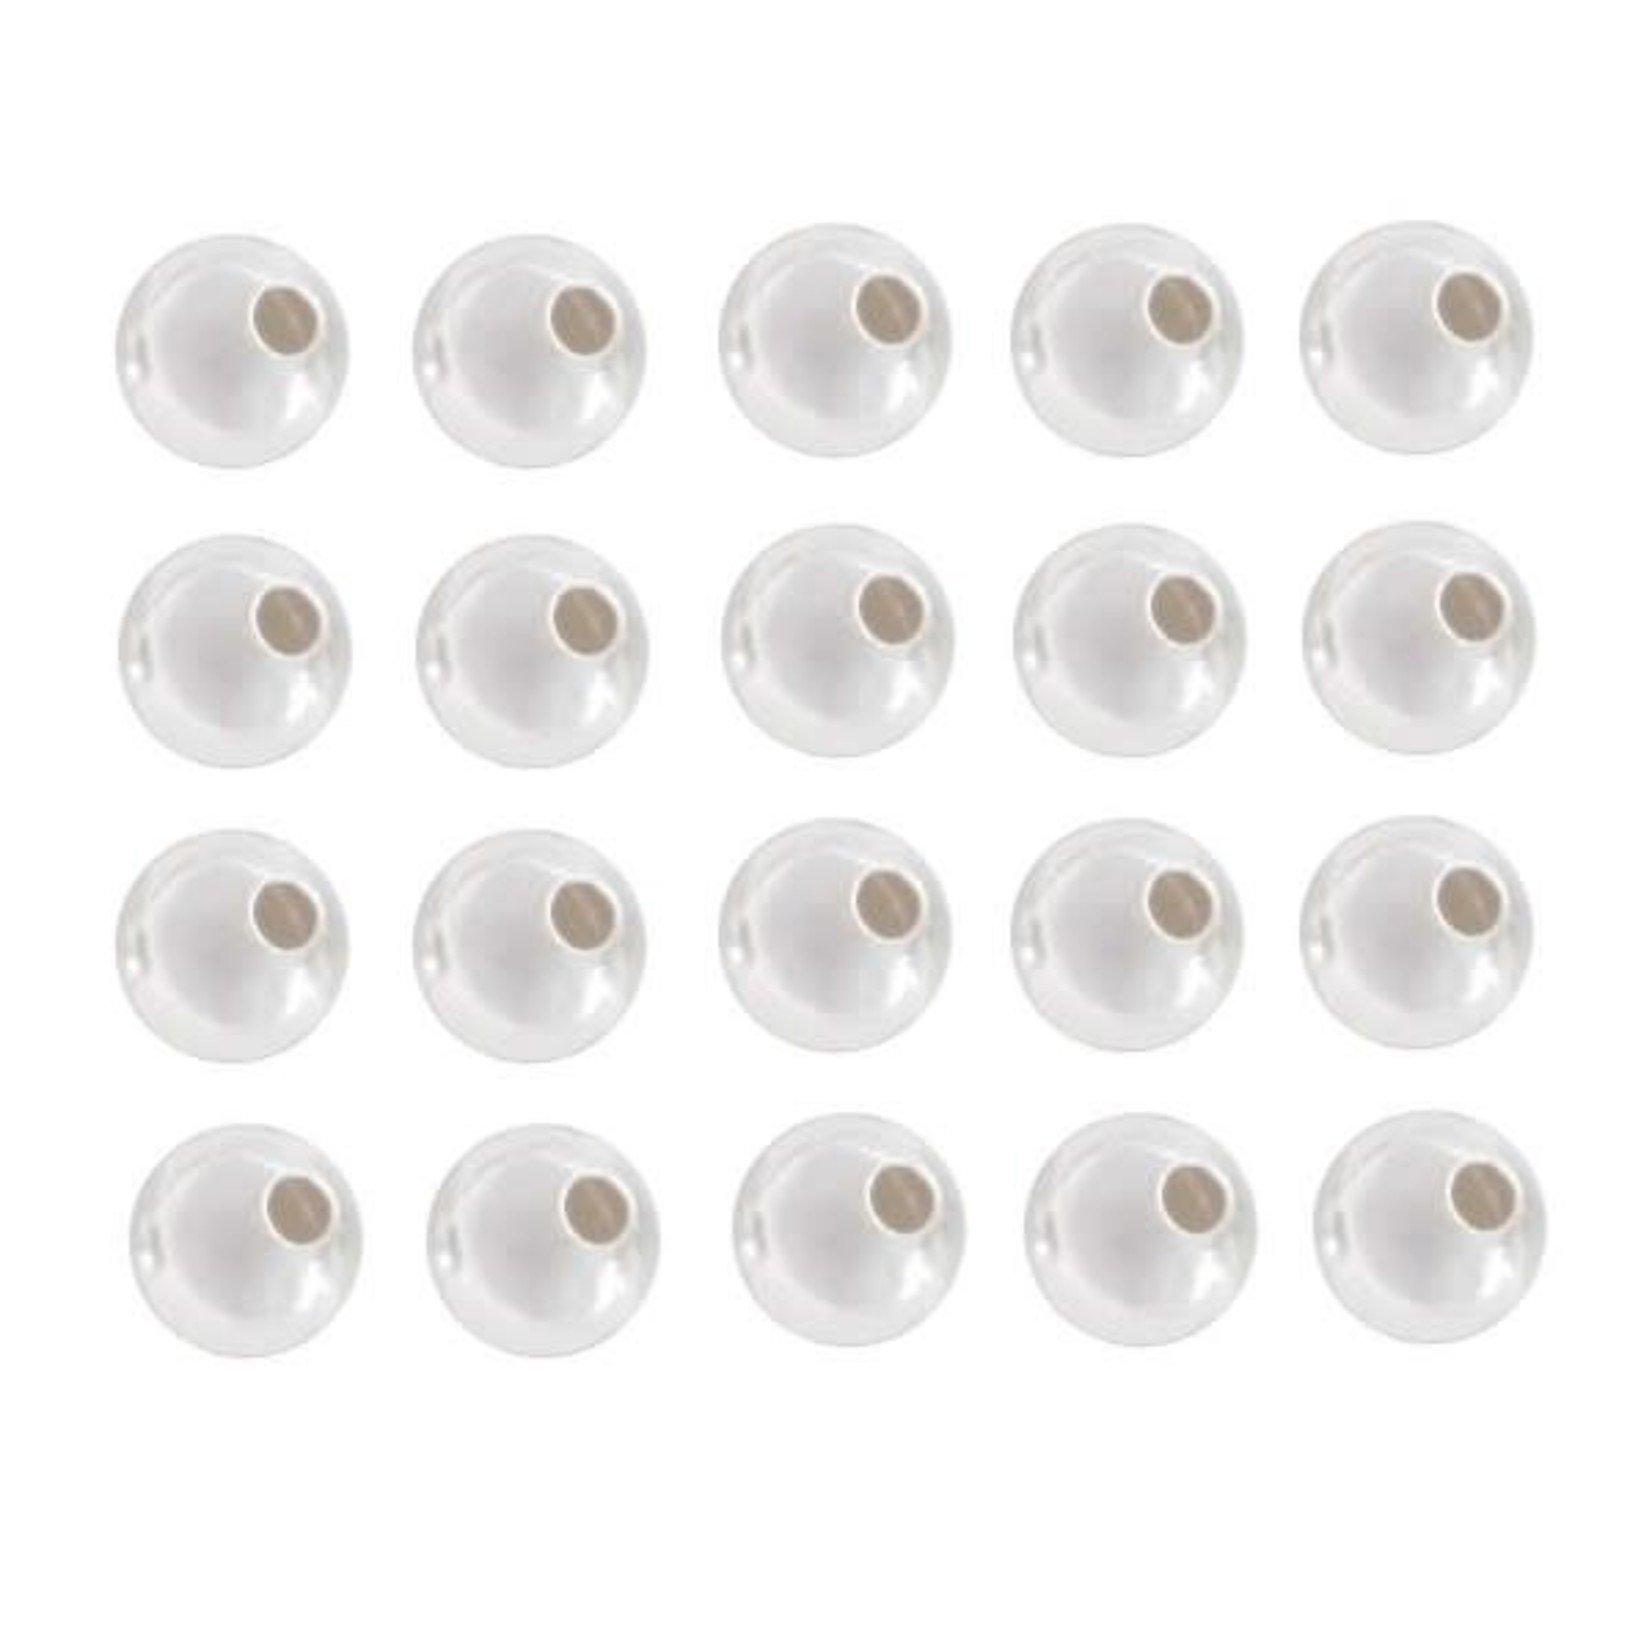 Sterling Silver 3mm Round Seamless Bead - 20 Pieces